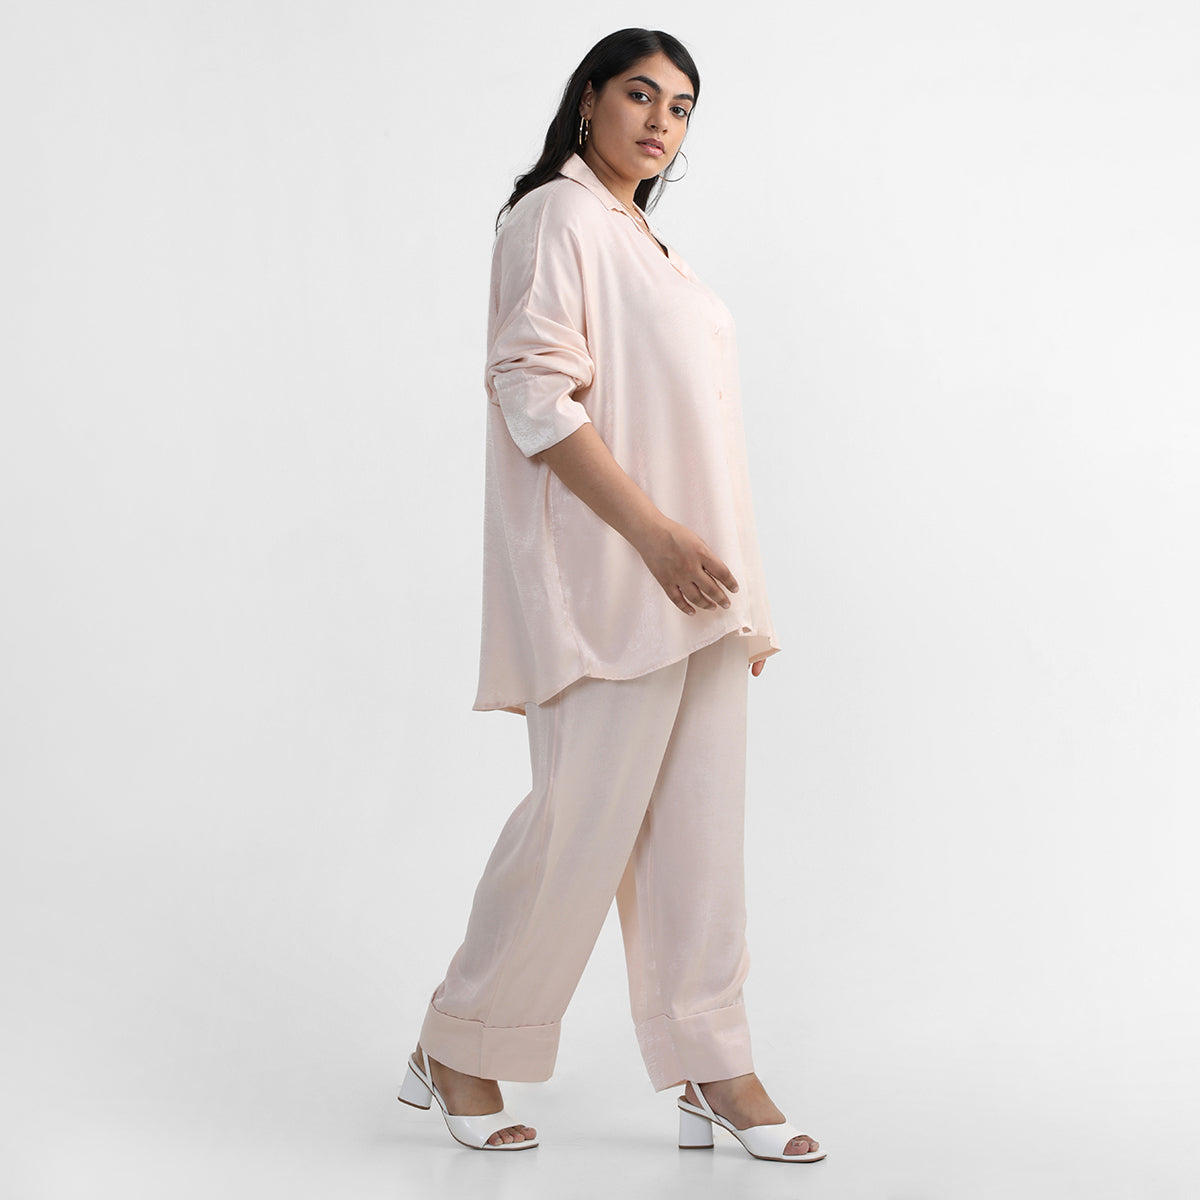 Plus Size Co Ord Sets - Trendy Co Ord Sets For Curvy Women – The Pink Moon